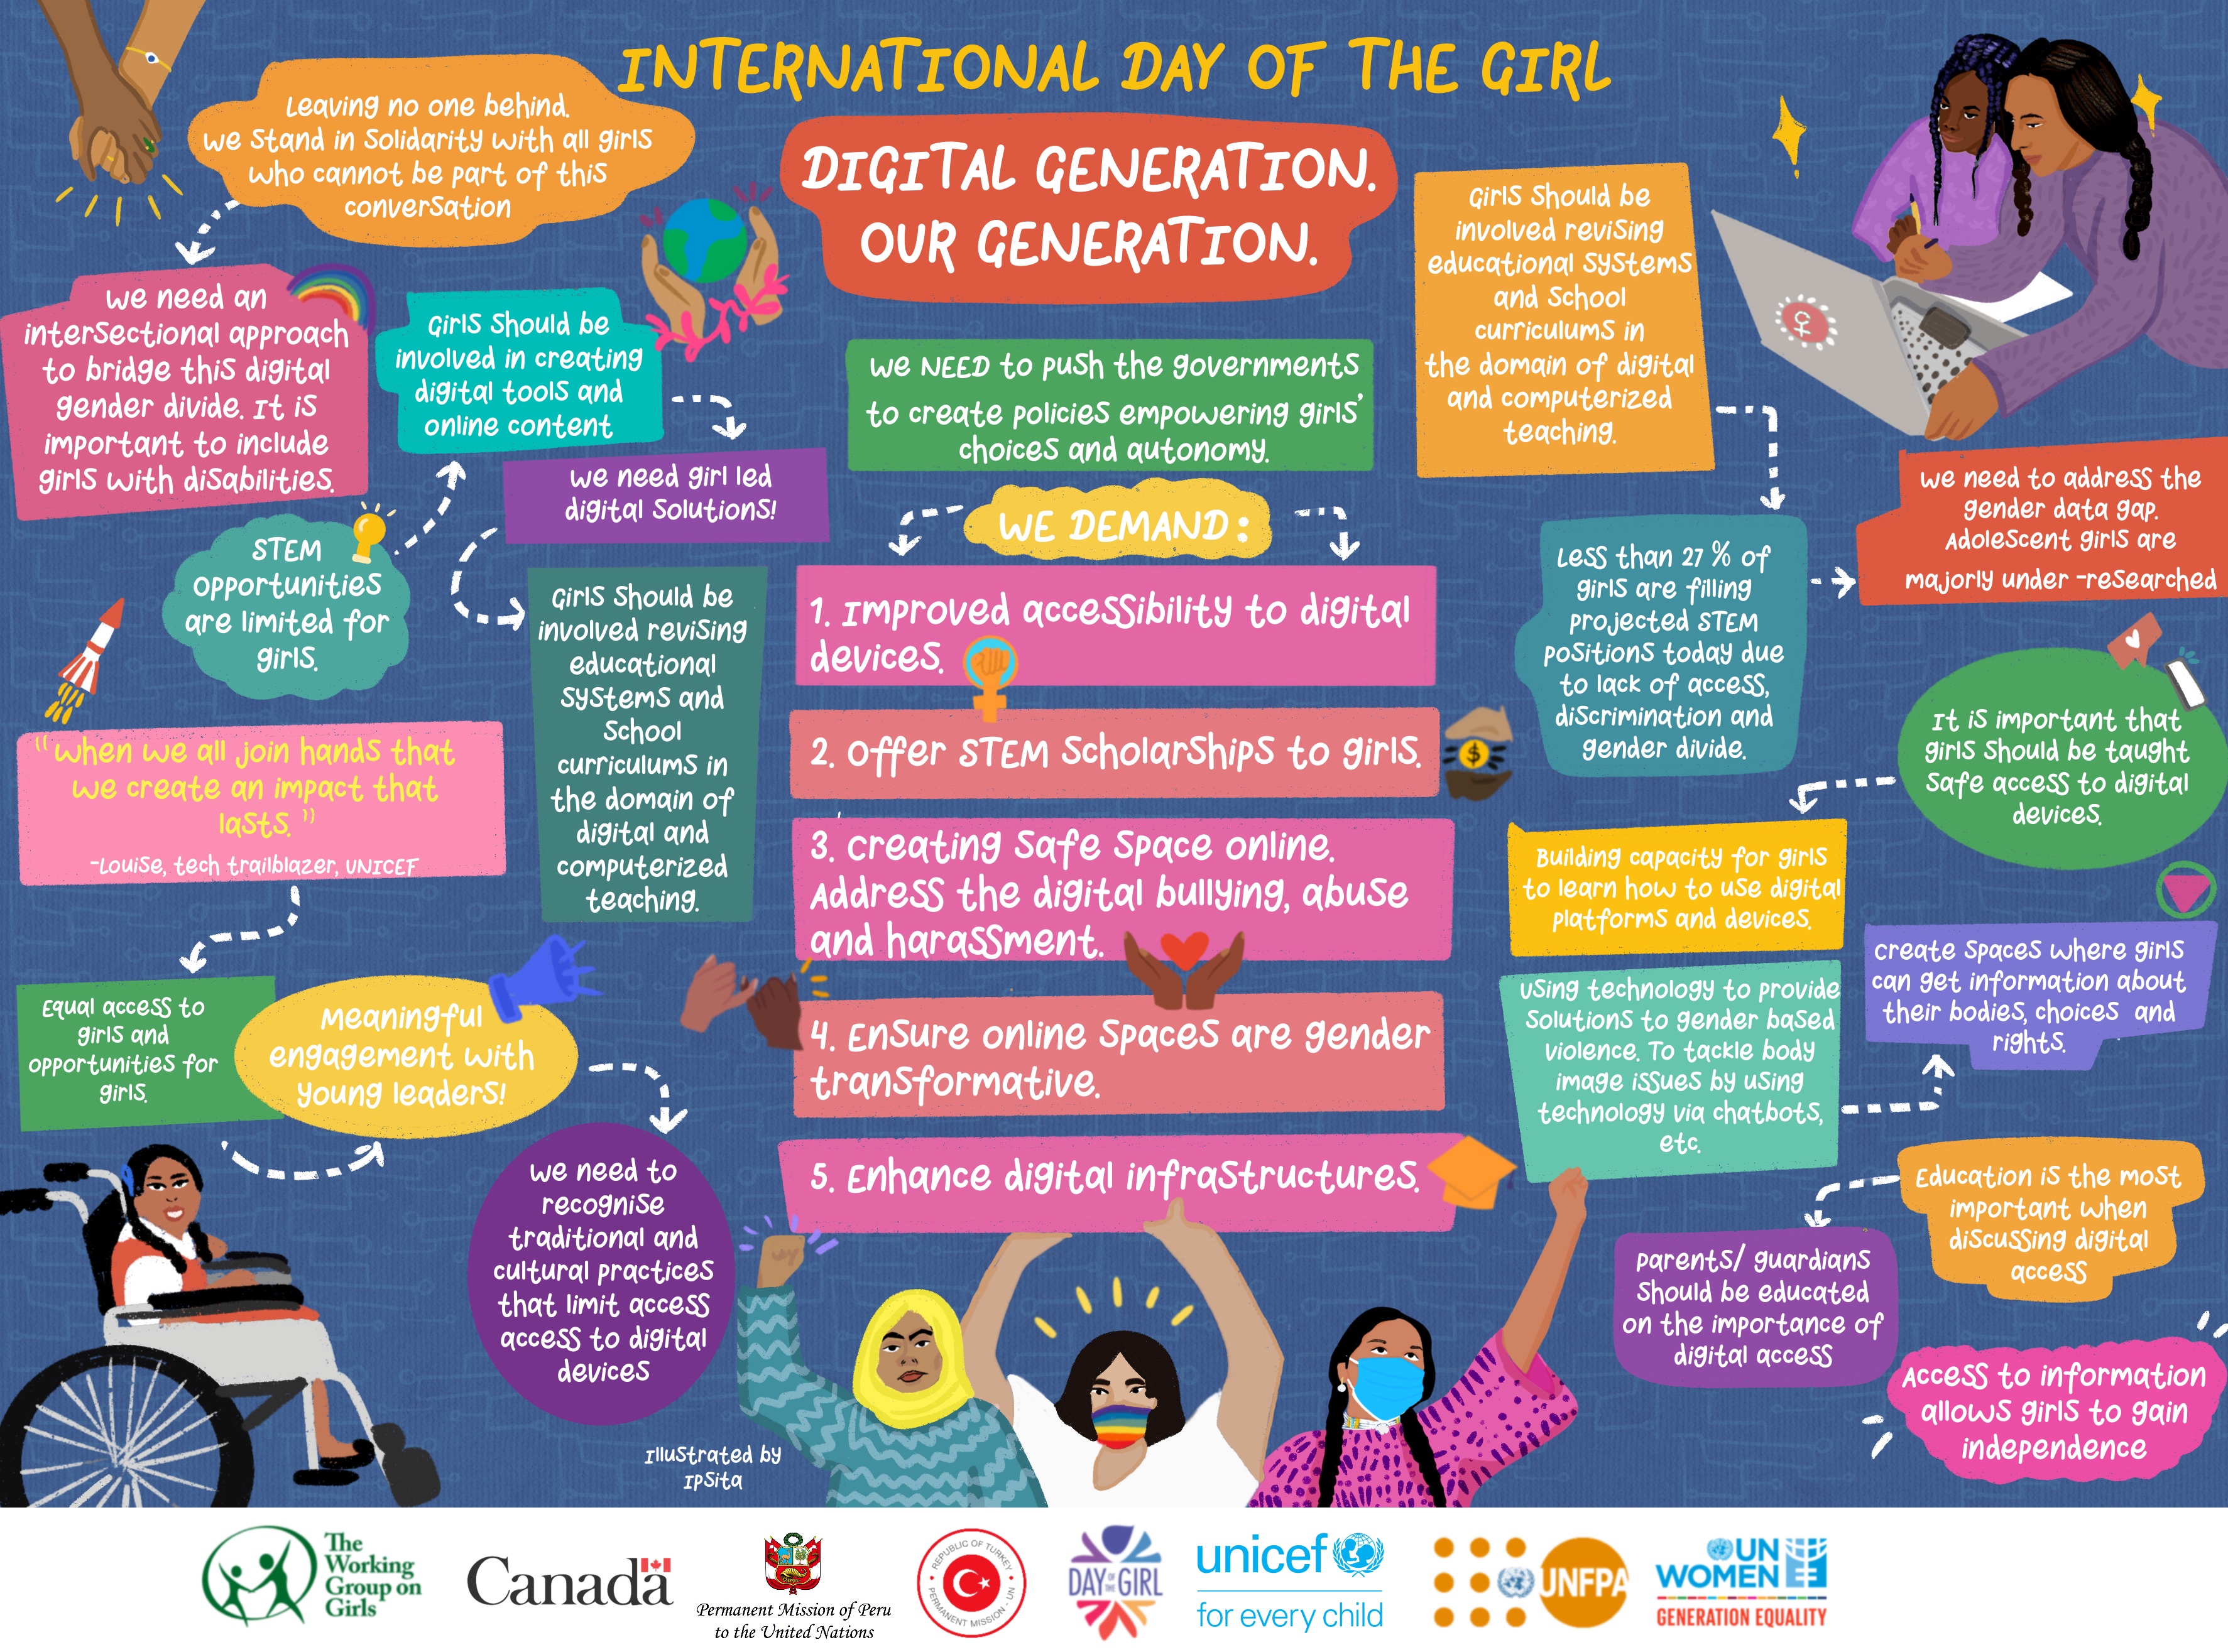 Graphic illustration summarising the international day of the girl discussion